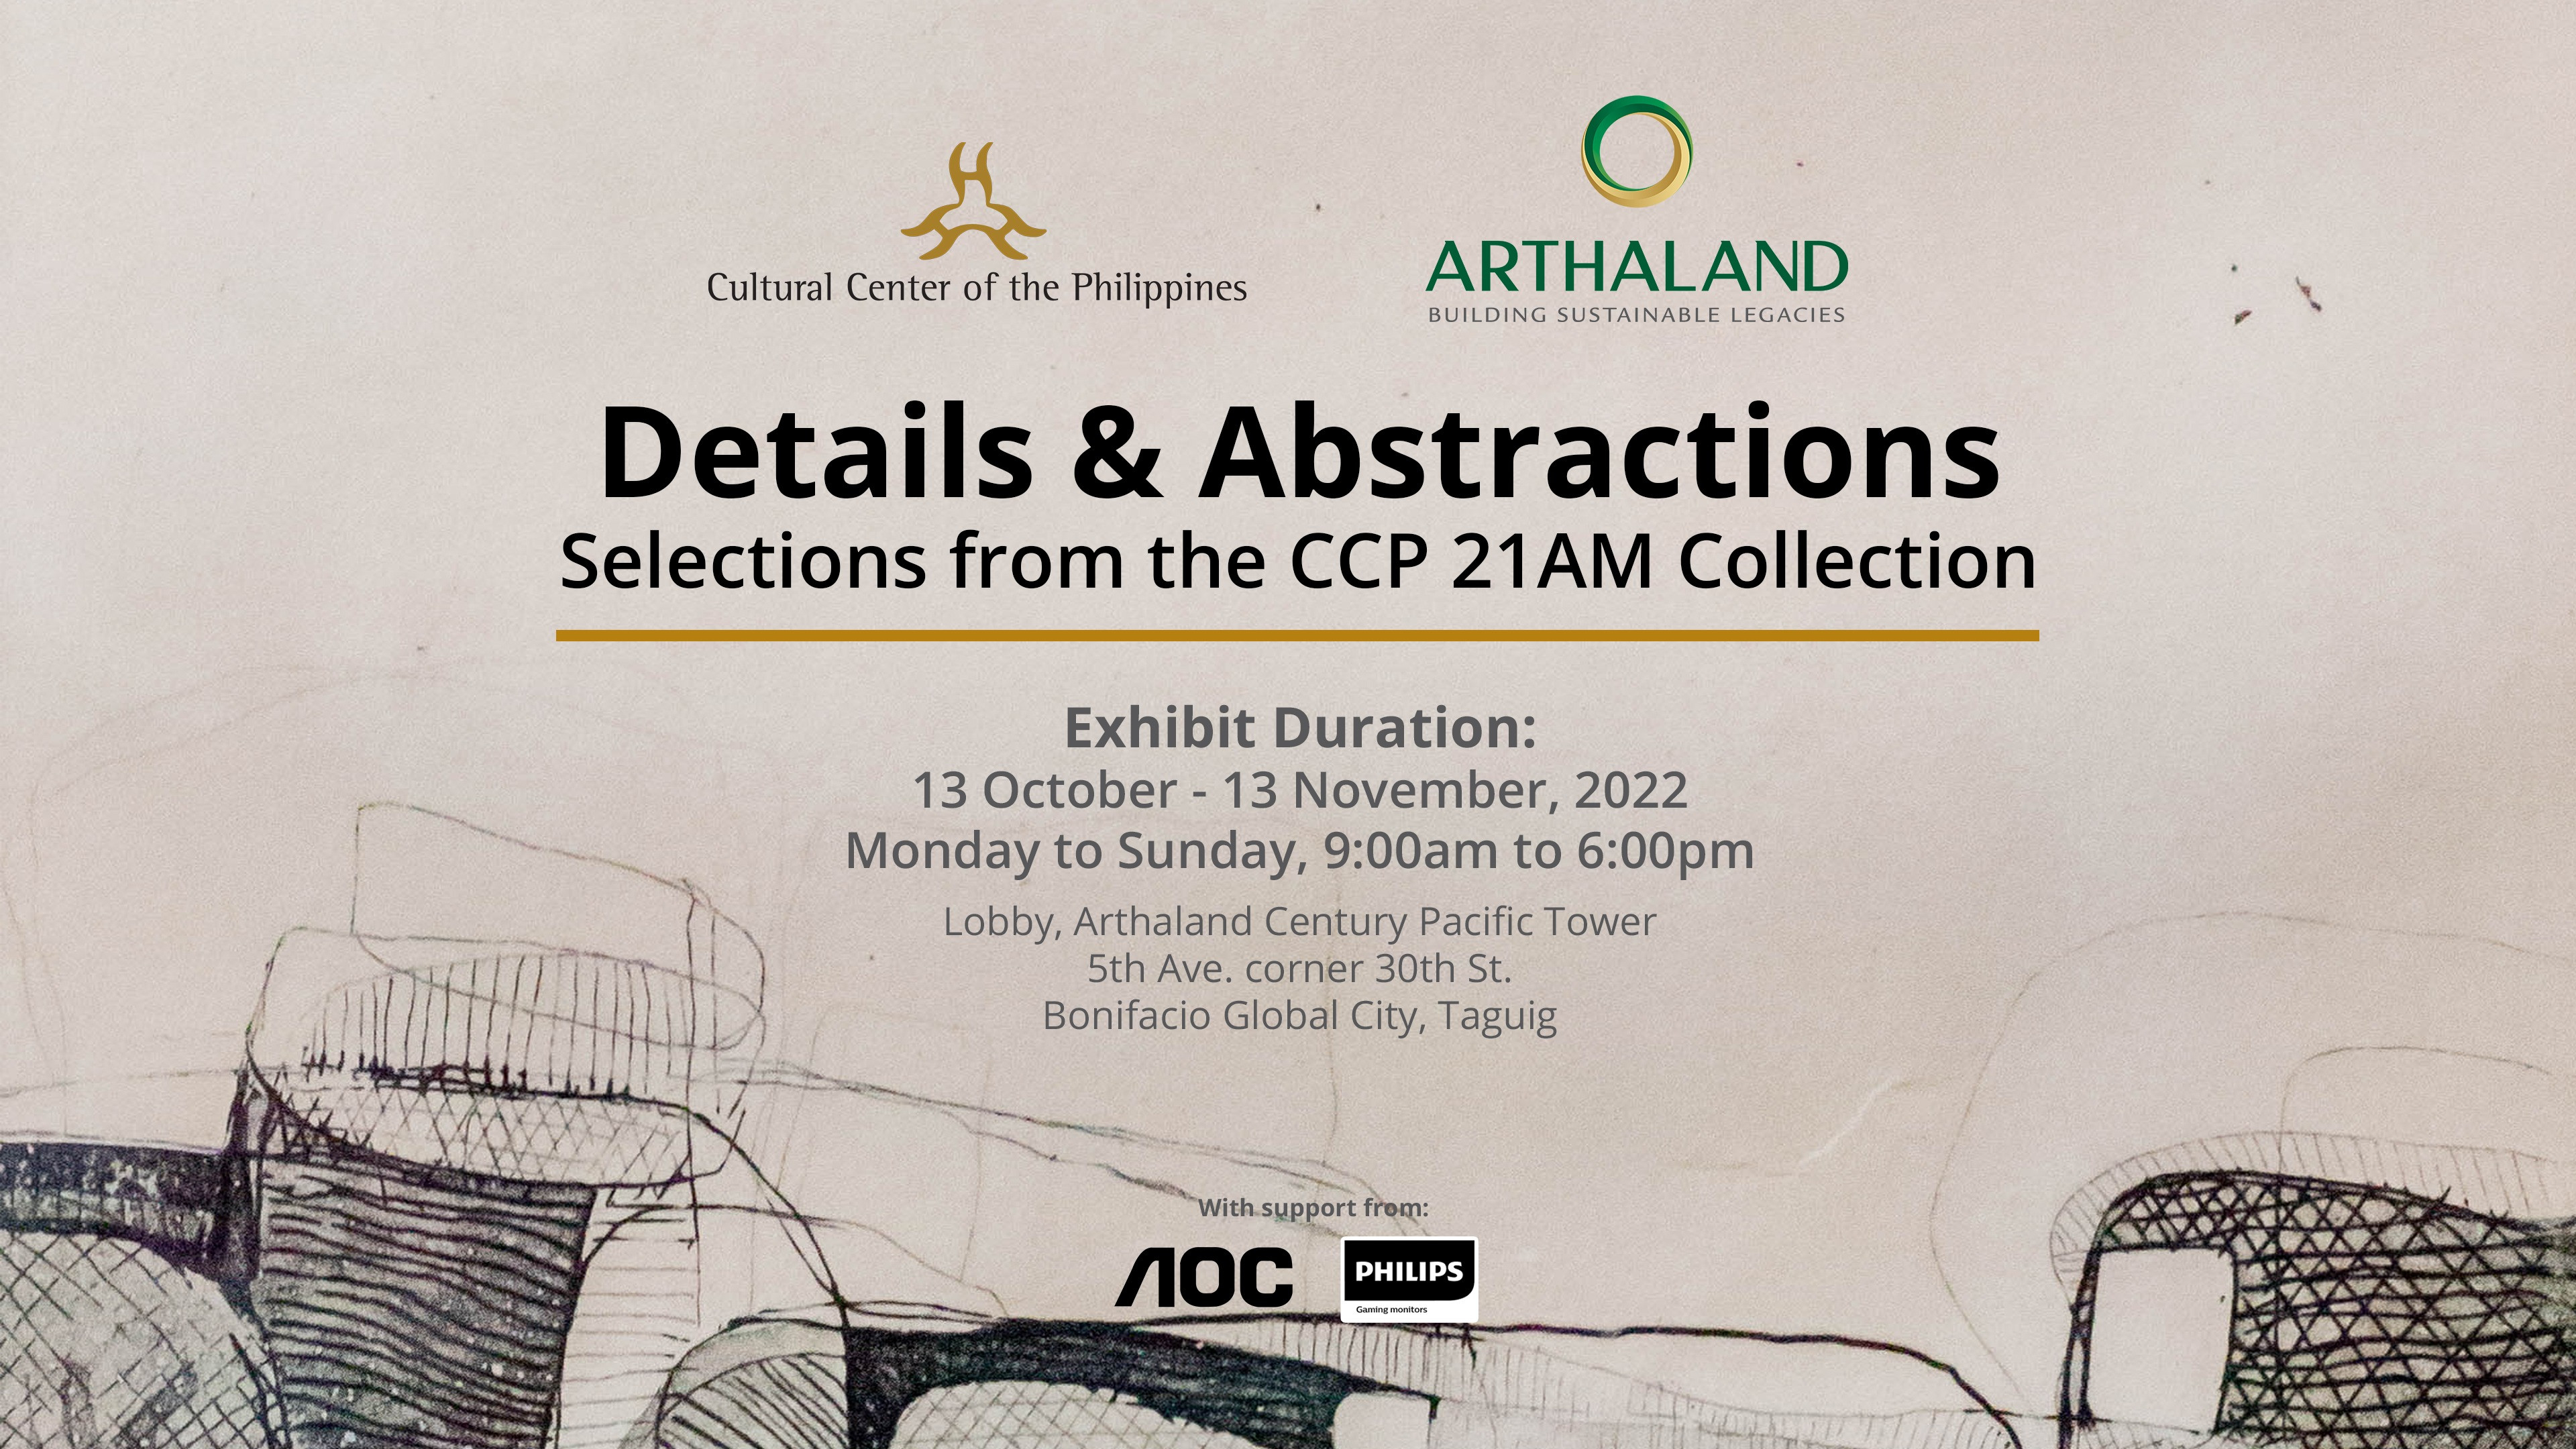 Details & Abstractions: Selections from the CCP 21AM Collection